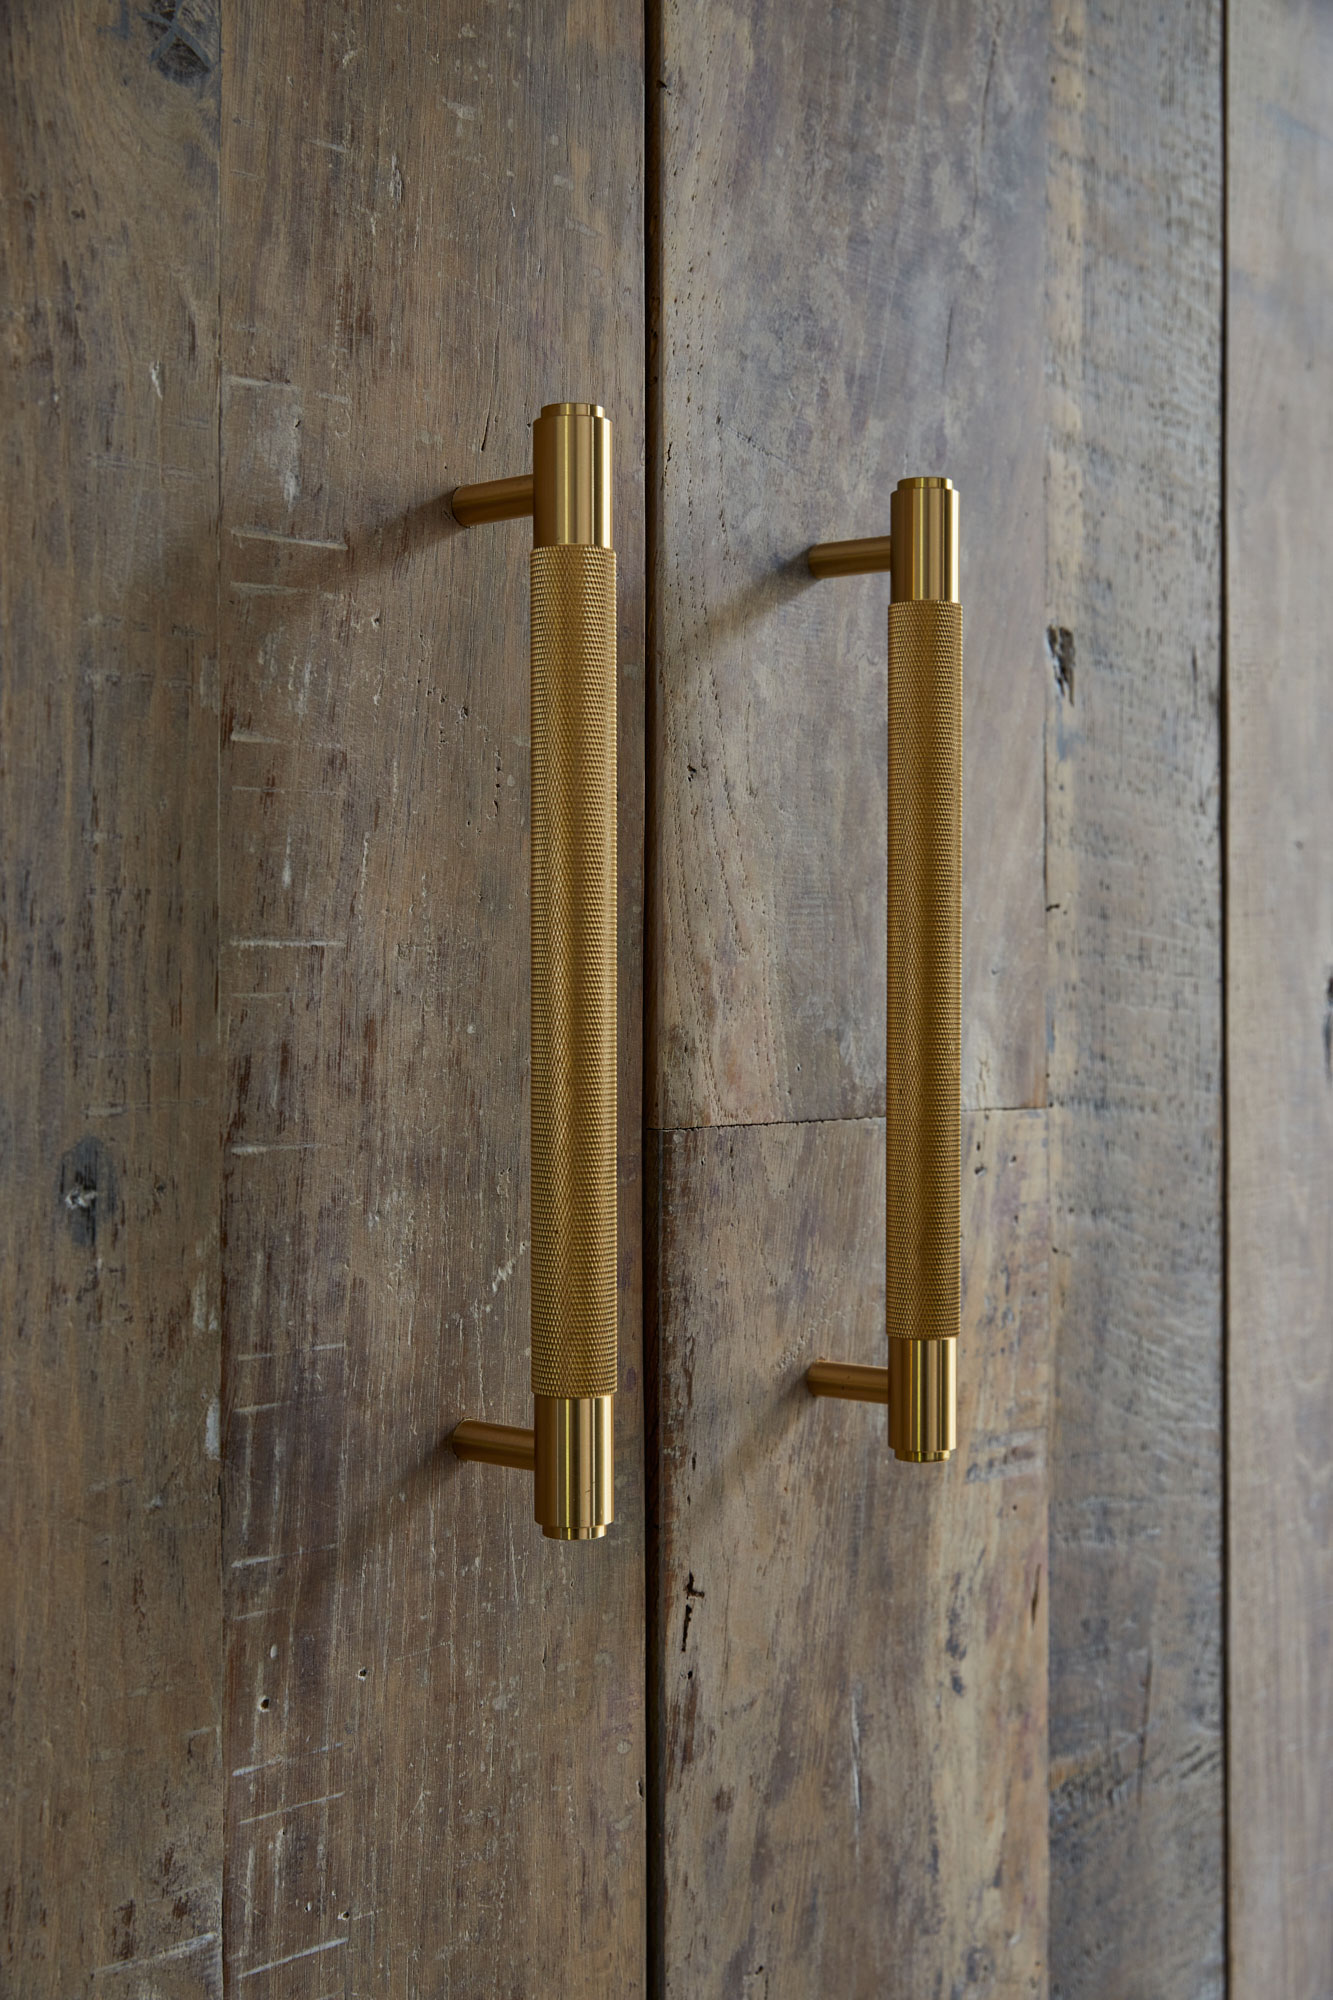 Chunky brass buster punch pull handles